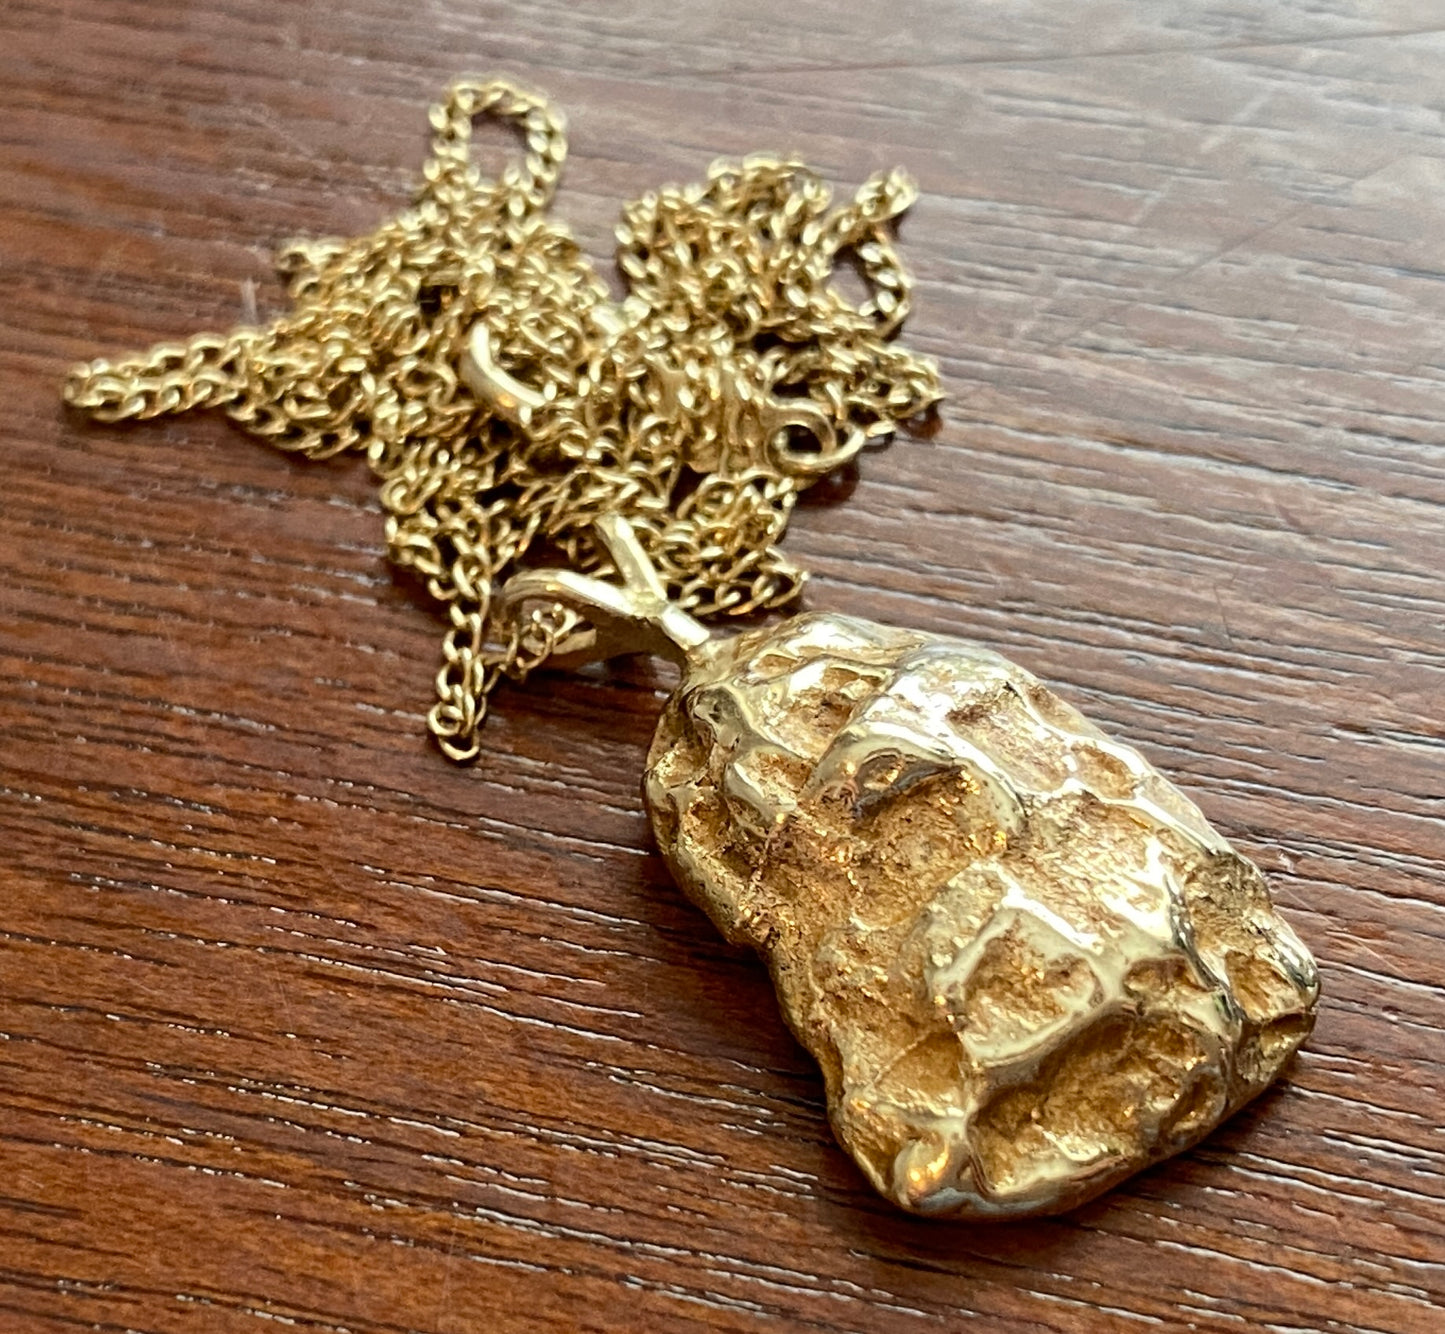 14k Yellow Gold Nugget Pendant Chain Necklace 17.5"